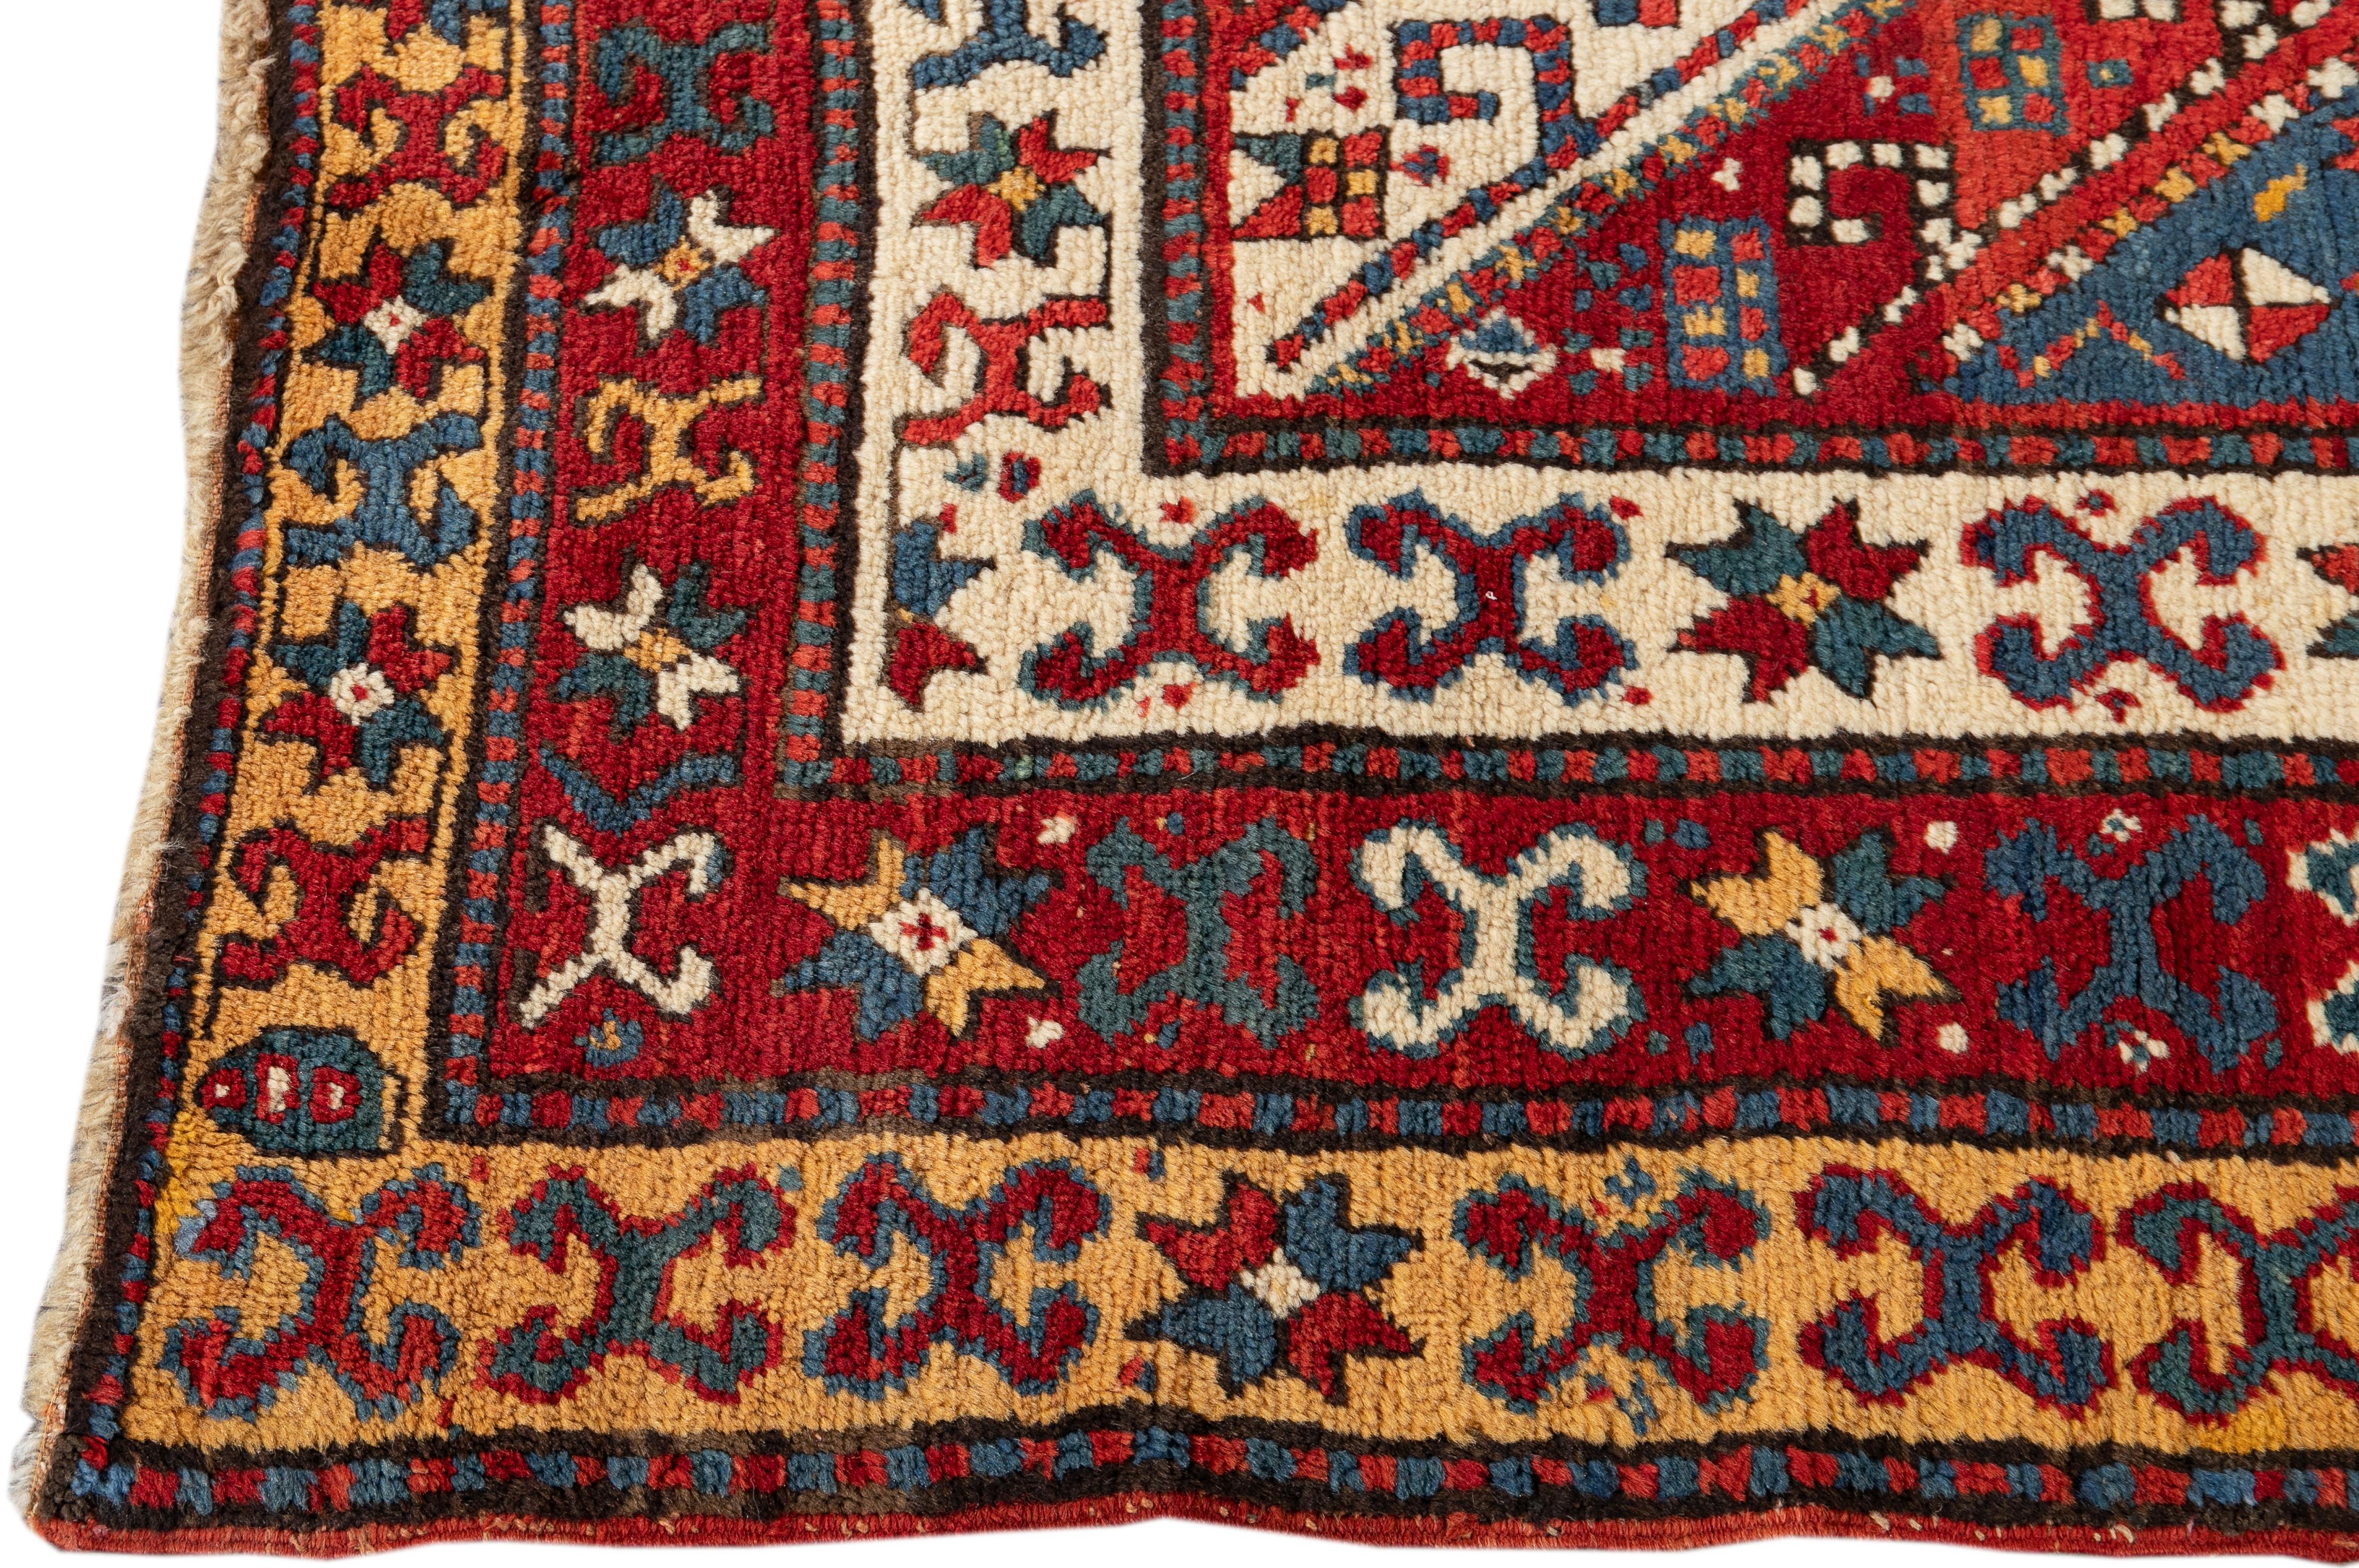 Beautiful antique Kazak hand-knotted wool rug with a red field. This rug has yellow, blue, and beige accents featuring an all-over geometric design.

This rug measures: 4'2